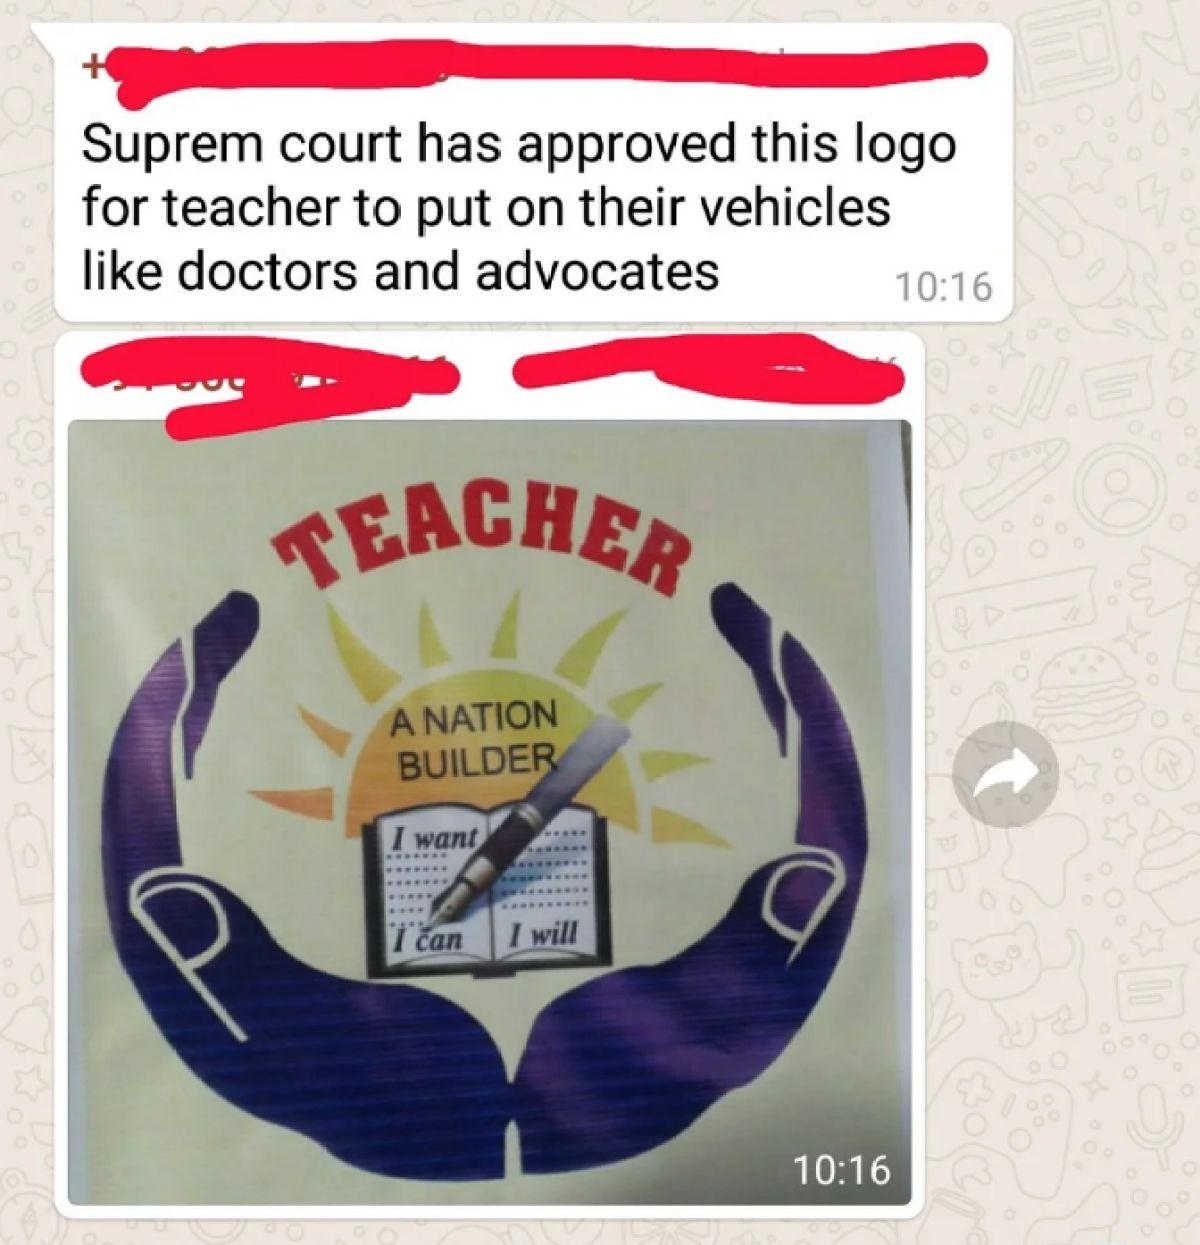 Teacher Logo - No, Supreme Court Hasn't Approved Any Logo For Teachers to Stick